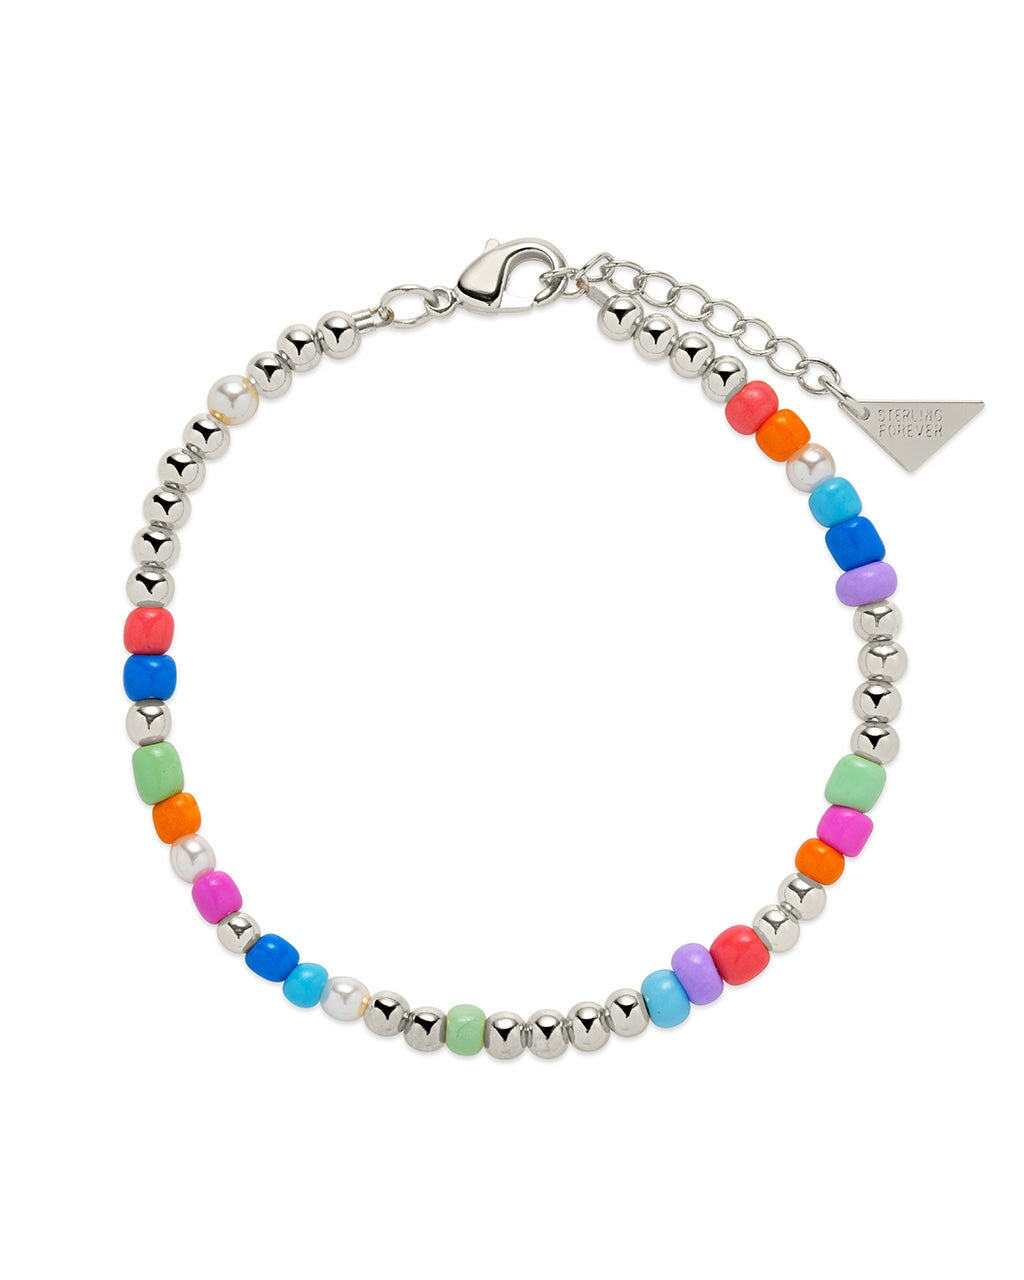 Coloured Evil Eye Bracelet with (imit) Pearl Beads – Knot the label